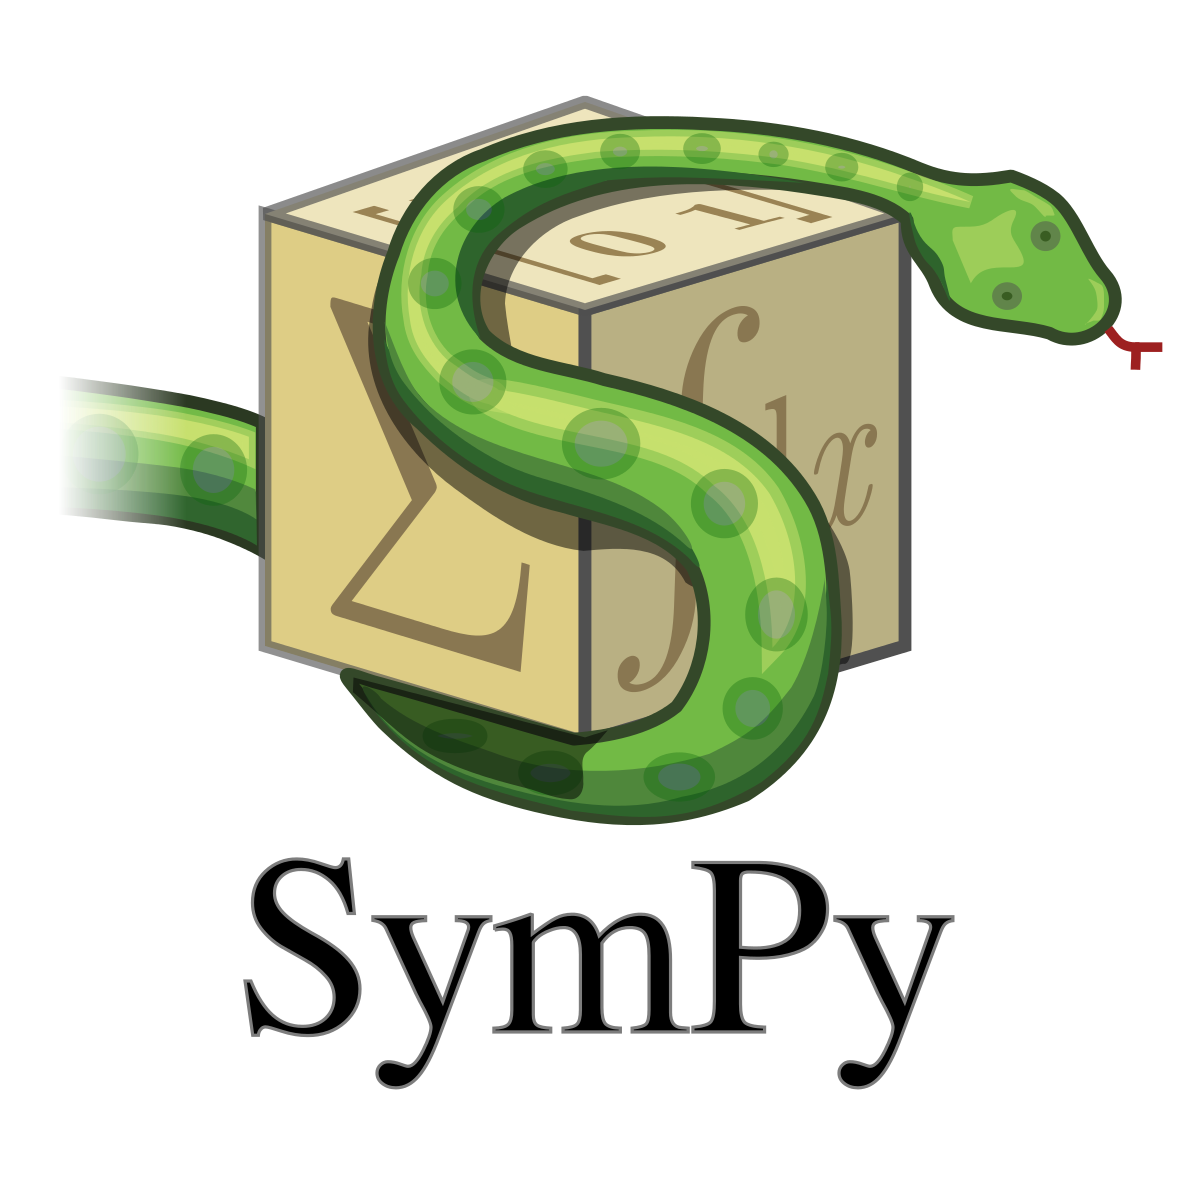 Fixing SymPy’s Limit Calculator Flaw